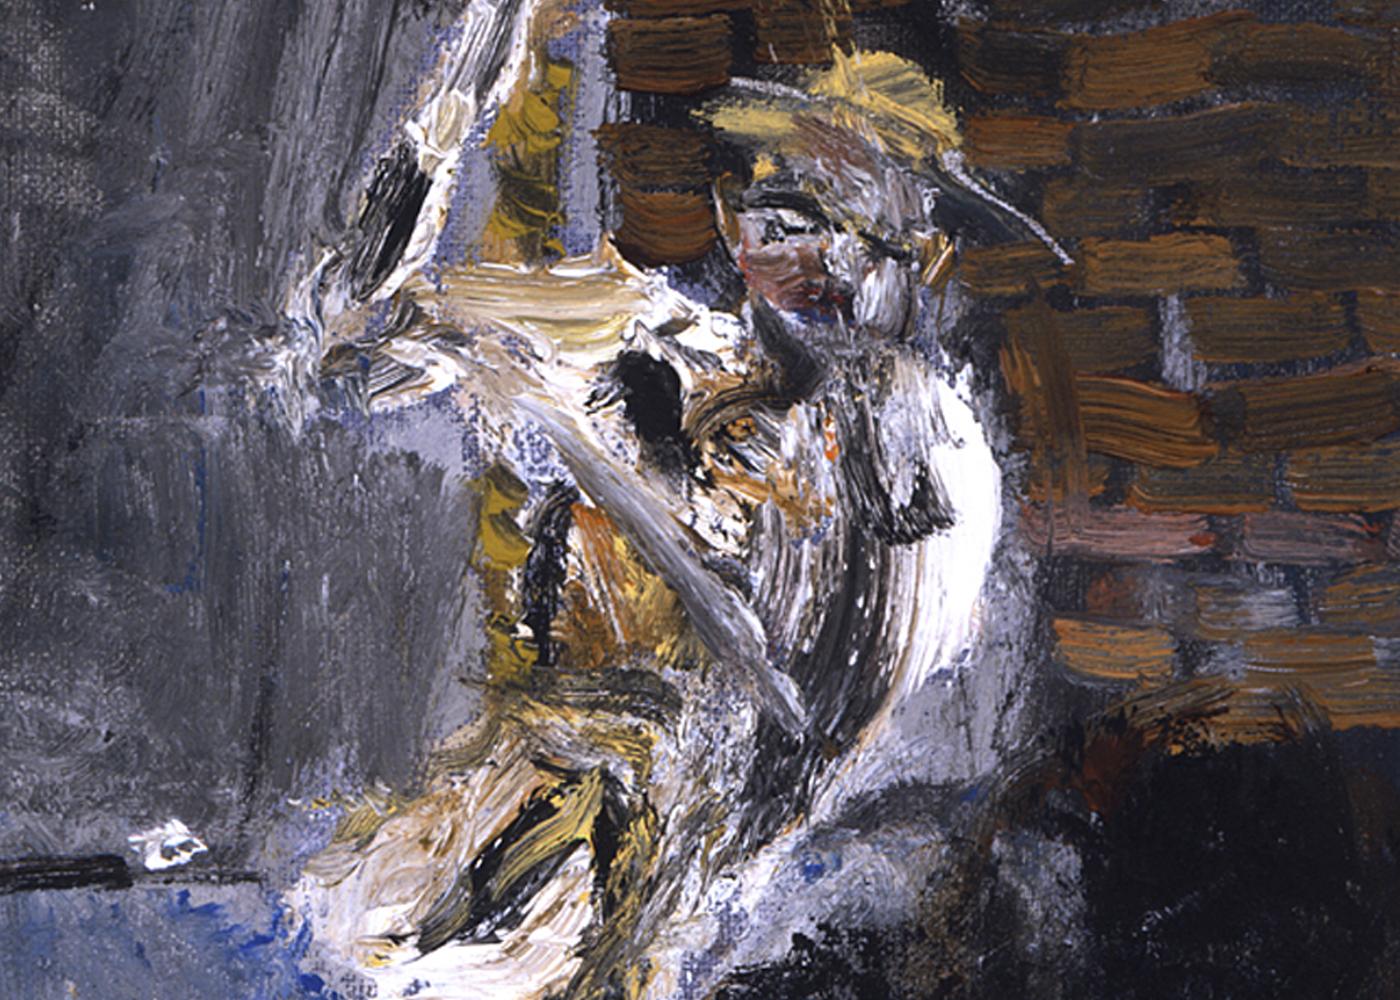 Escape. War painting, man trying to escape, tunnel, Holocaust related (Expressionismus), Painting, von Michael Hafftka